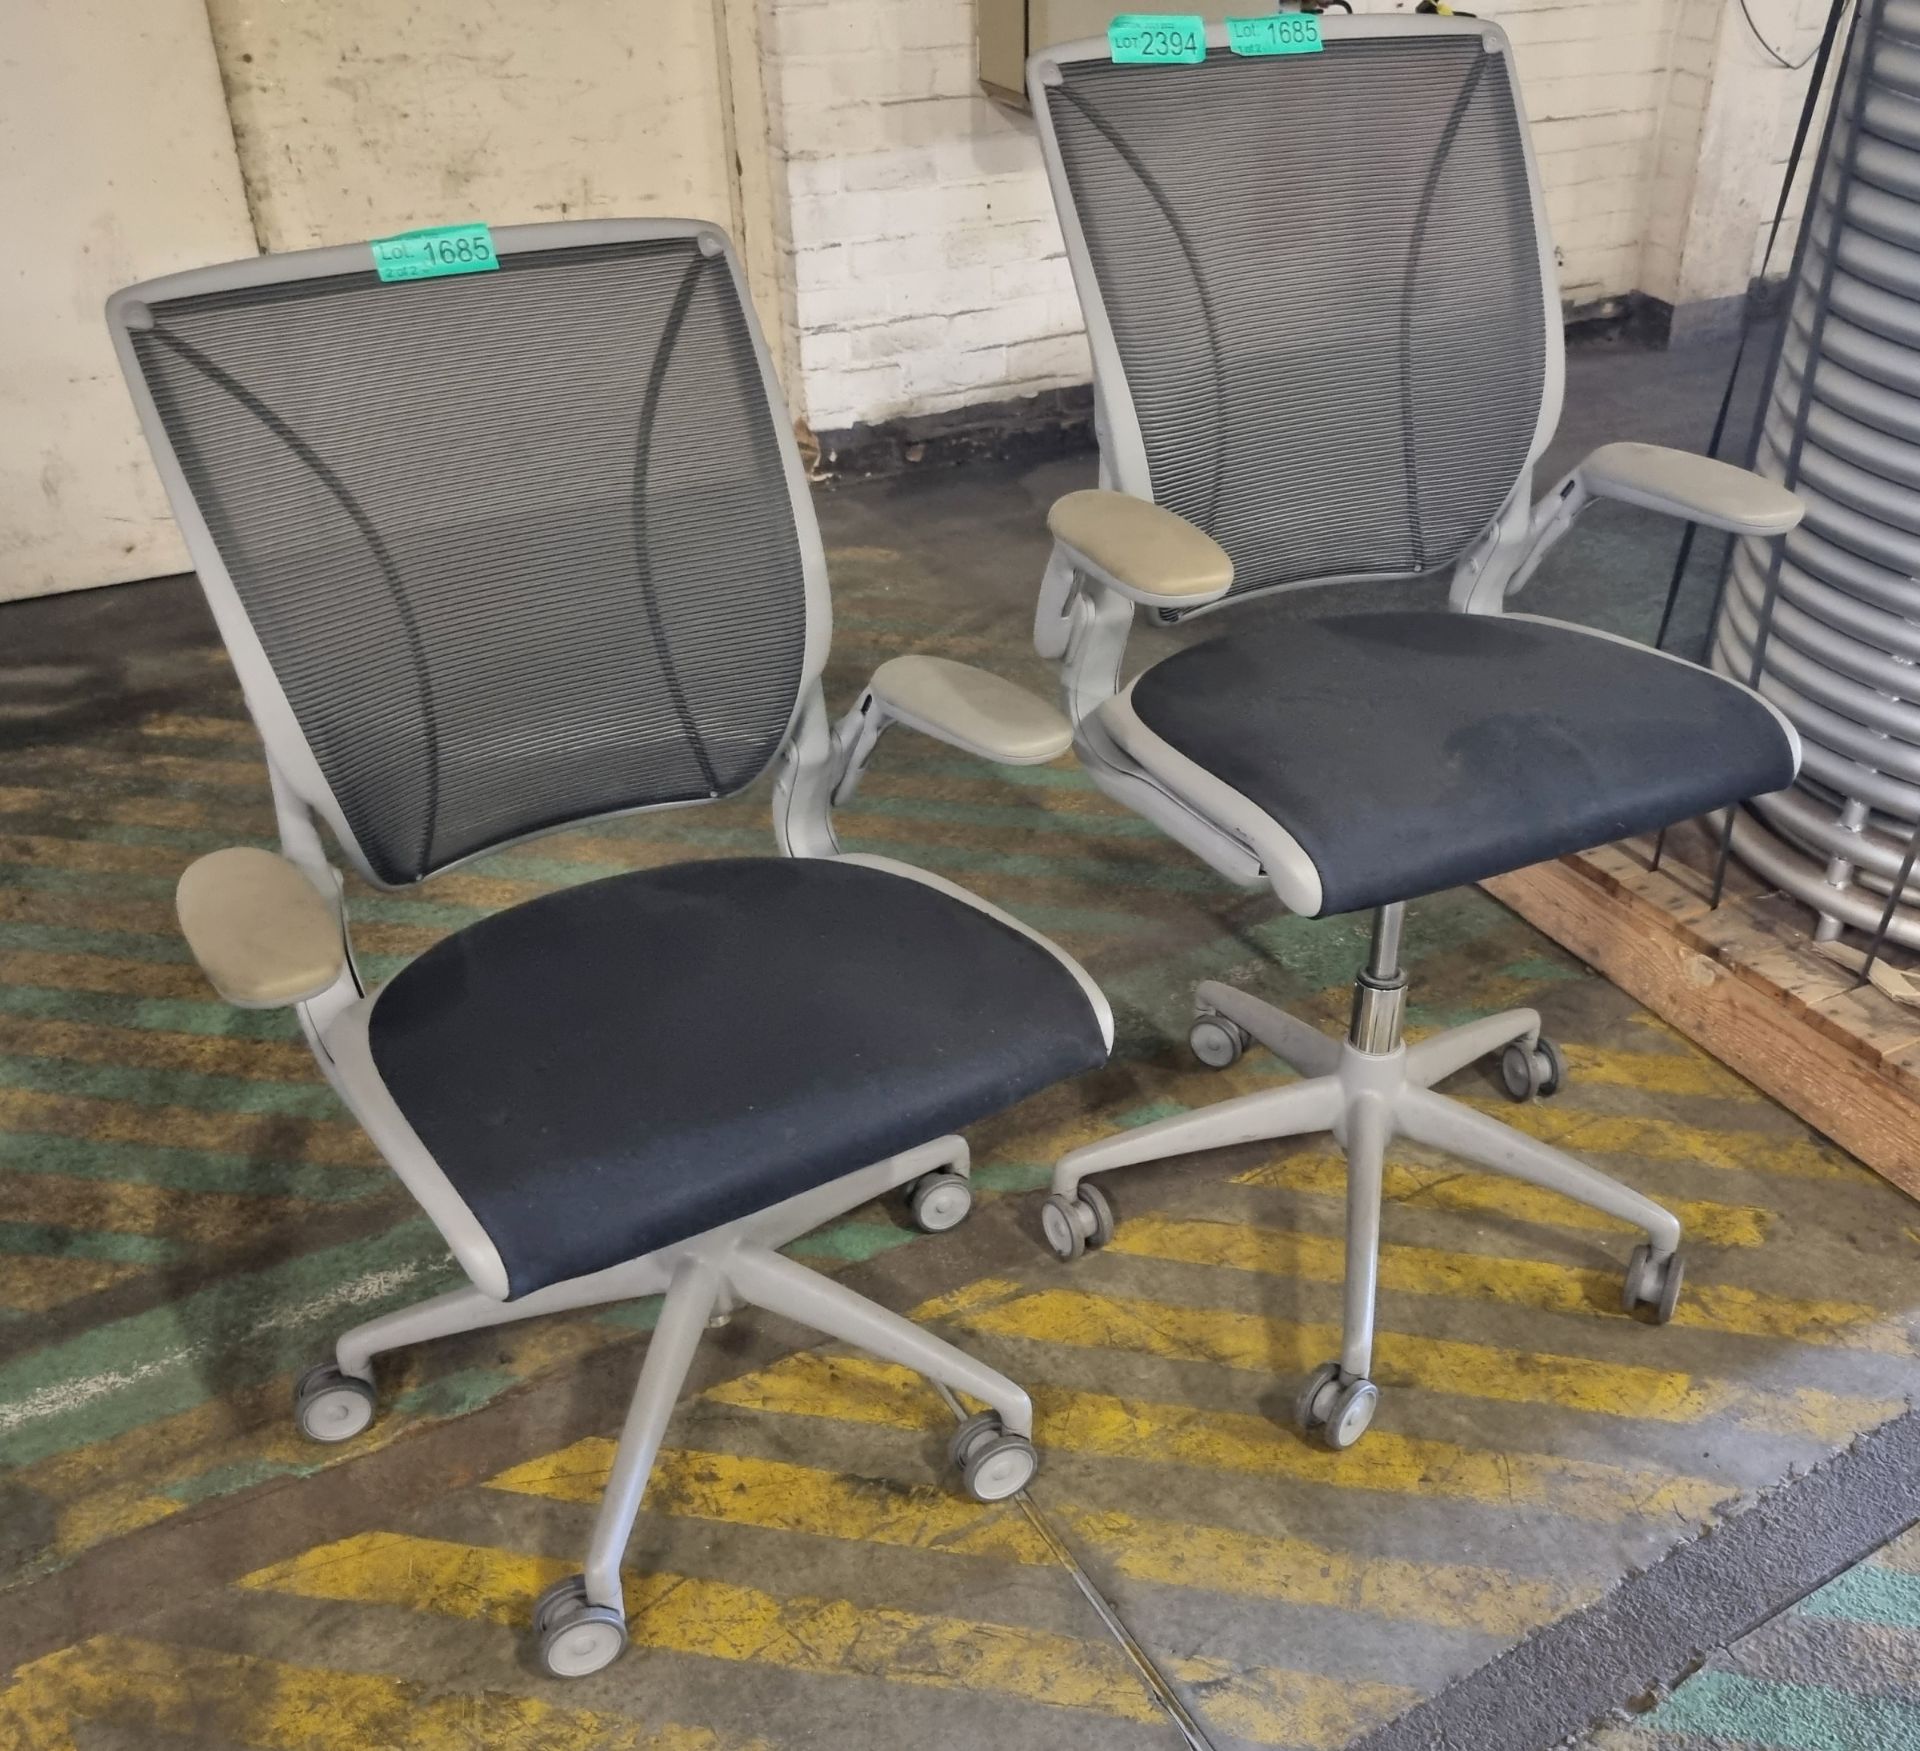 2x HumanScale Ergonomic Office Chair - Image 2 of 3